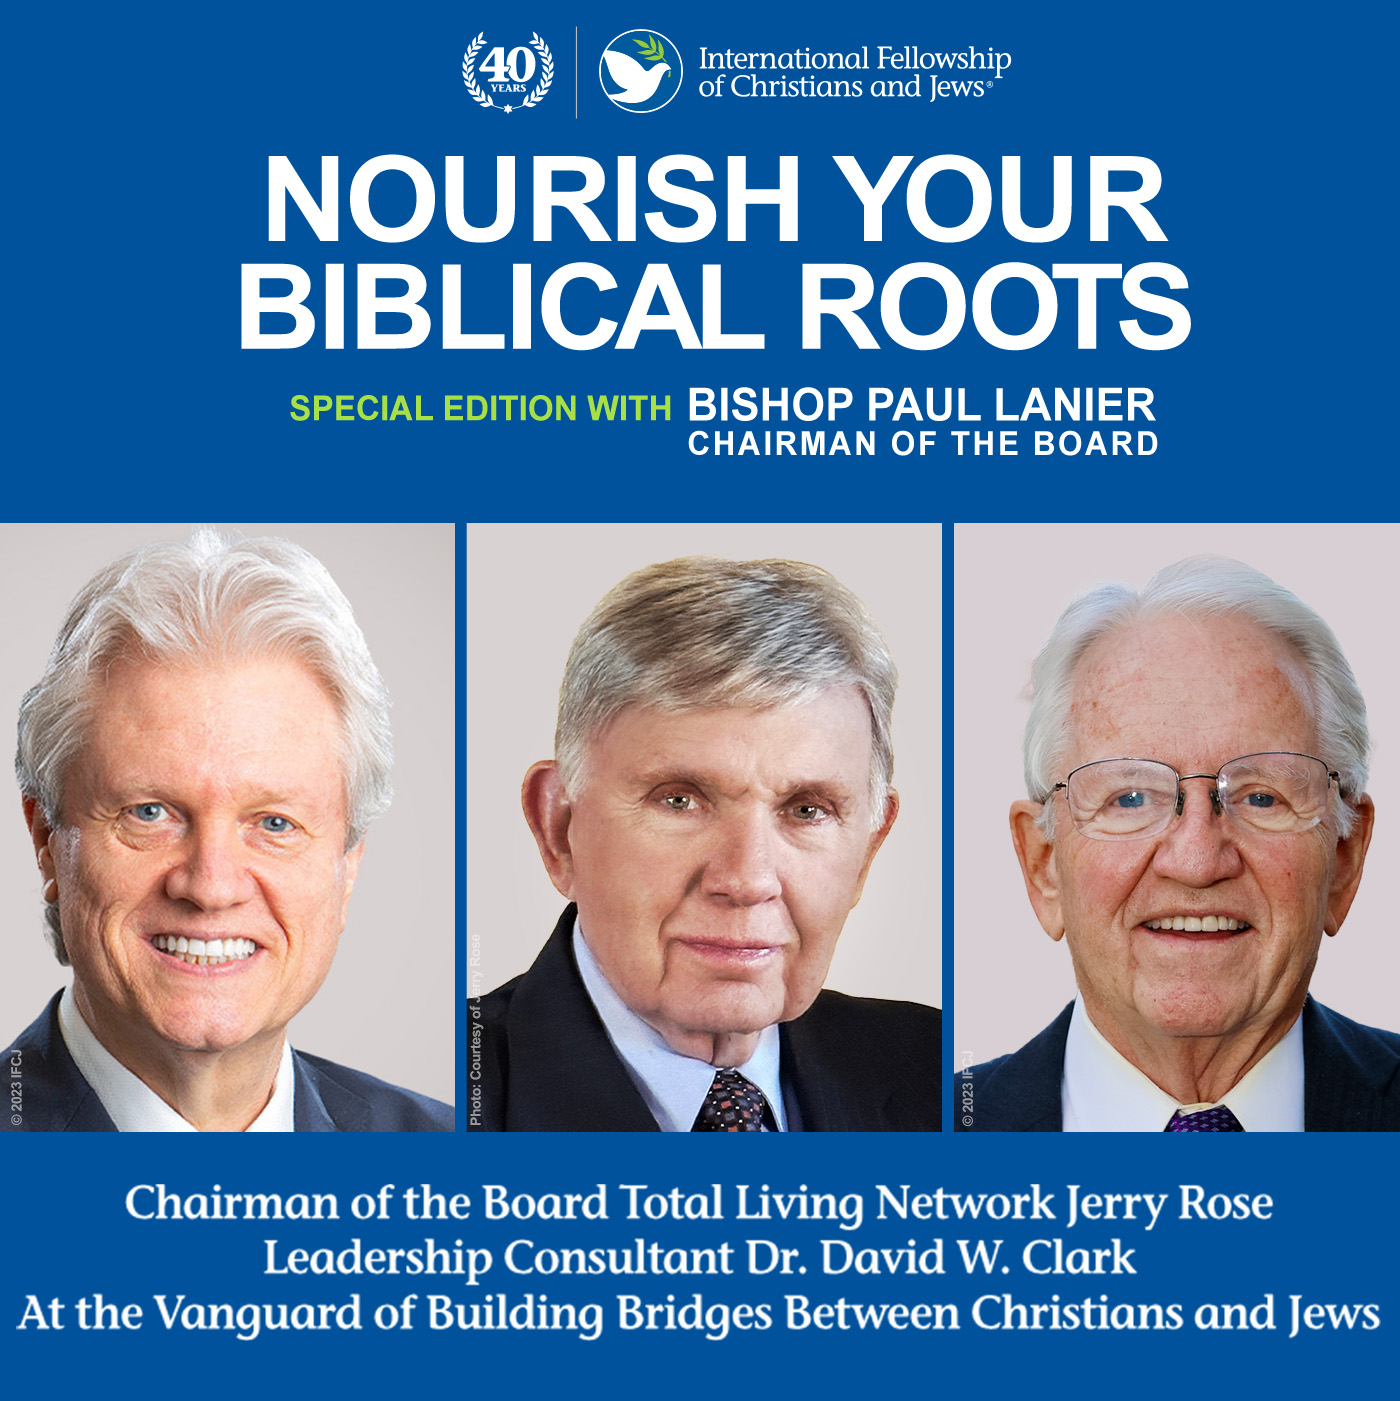 Nourish Your Biblical Roots Special Edition with Bishop Paul Lanier -- Jerry Rose & David Clark: At the Vanguard of Building Bridges Between Christians and Jews